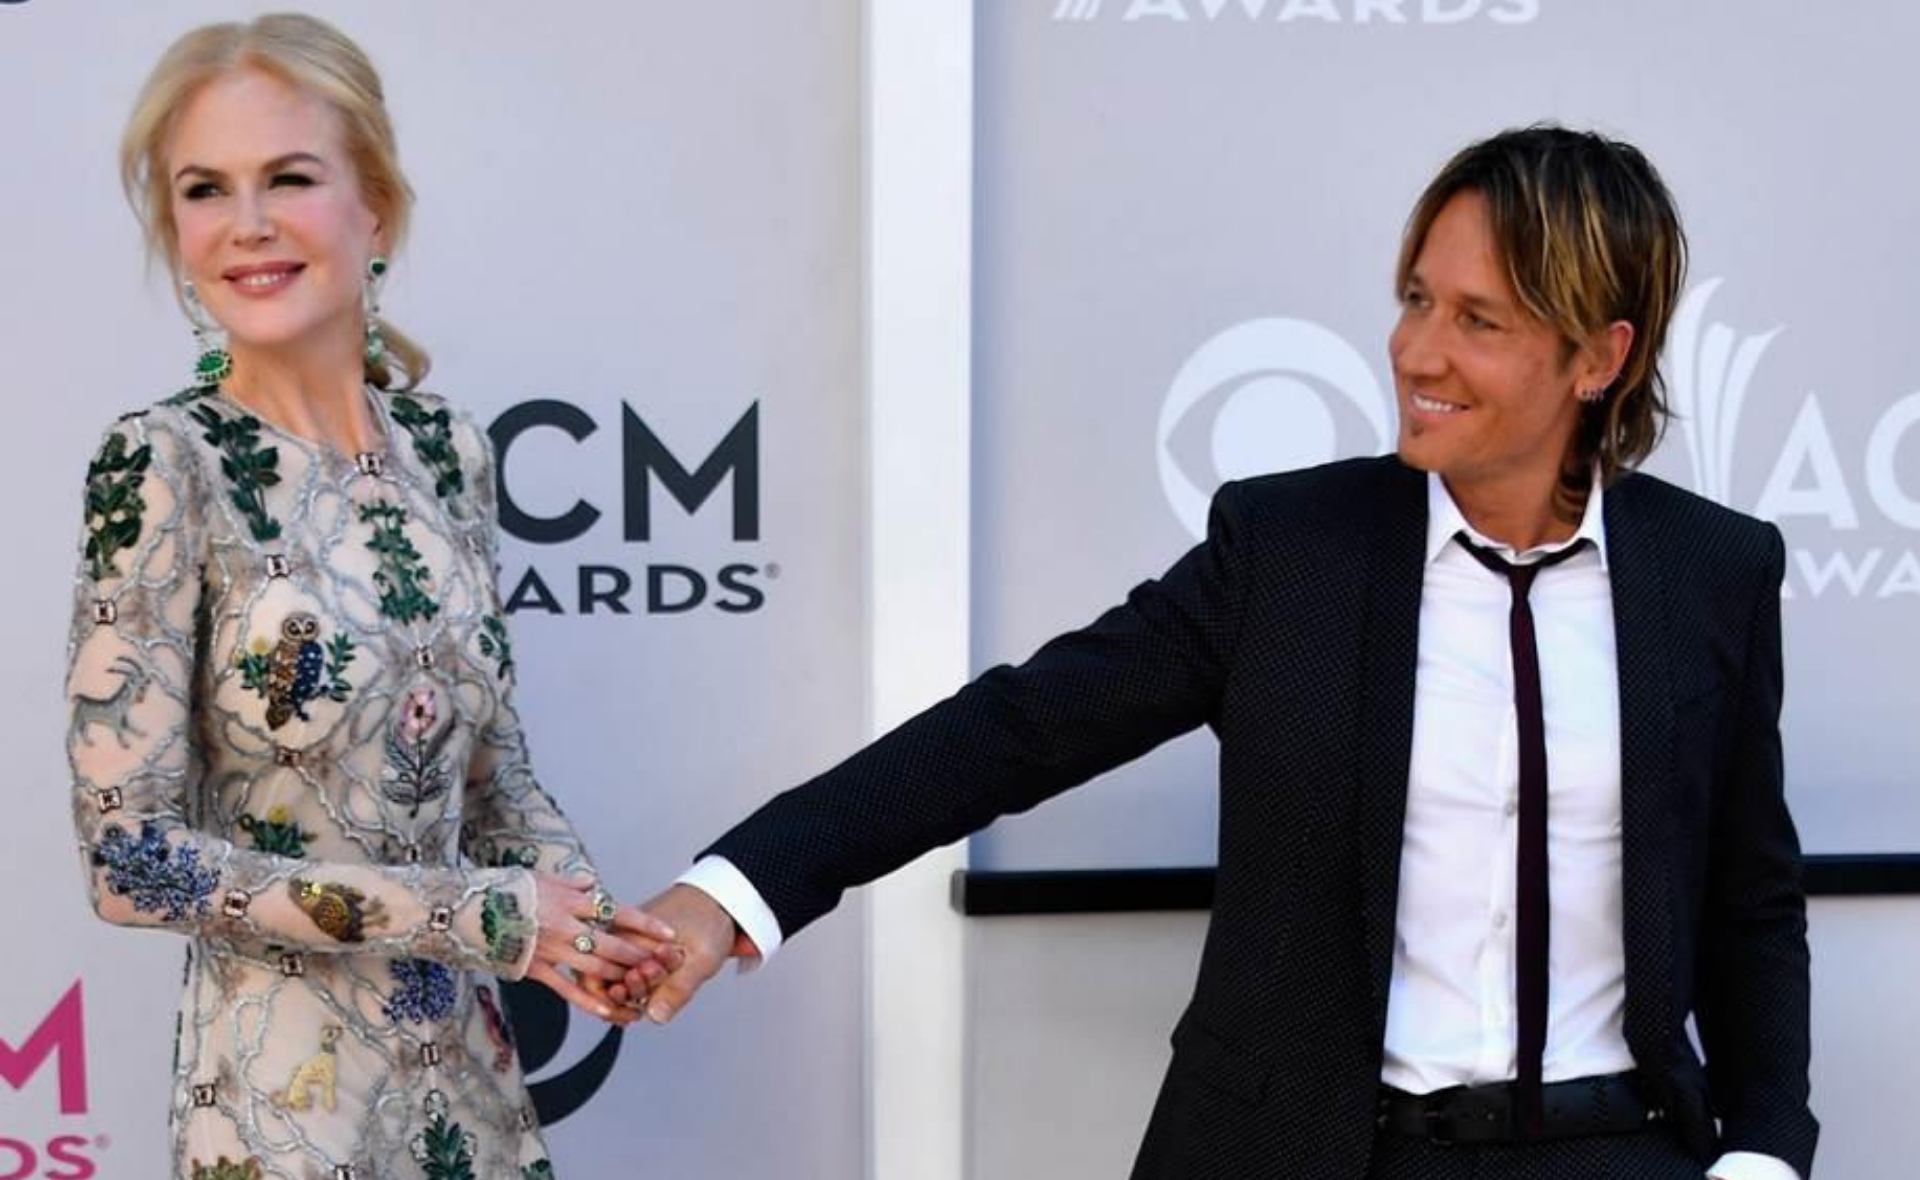 Keith Urban shares a stunning candid snap of wife Nicole Kidman in a sweet tribute on her birthday